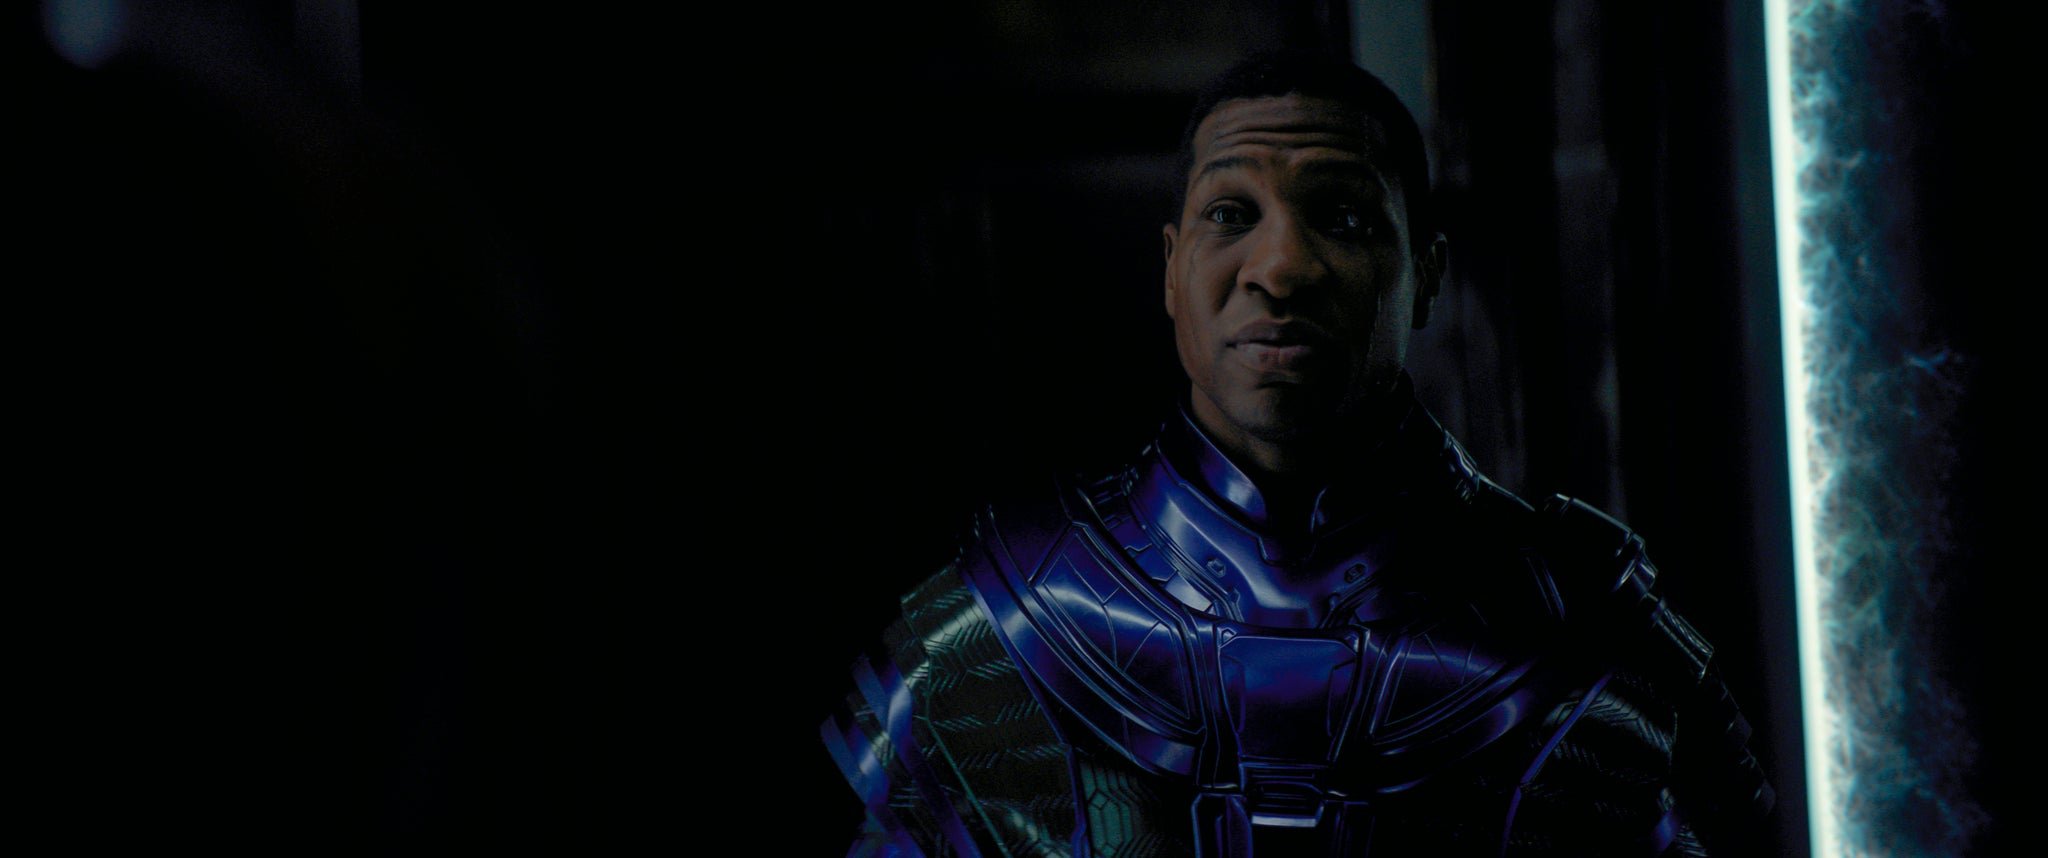 Promotional image of Jonathan Majors as Kang the Conqueror in Ant-Man and the Wasp: Quantumania